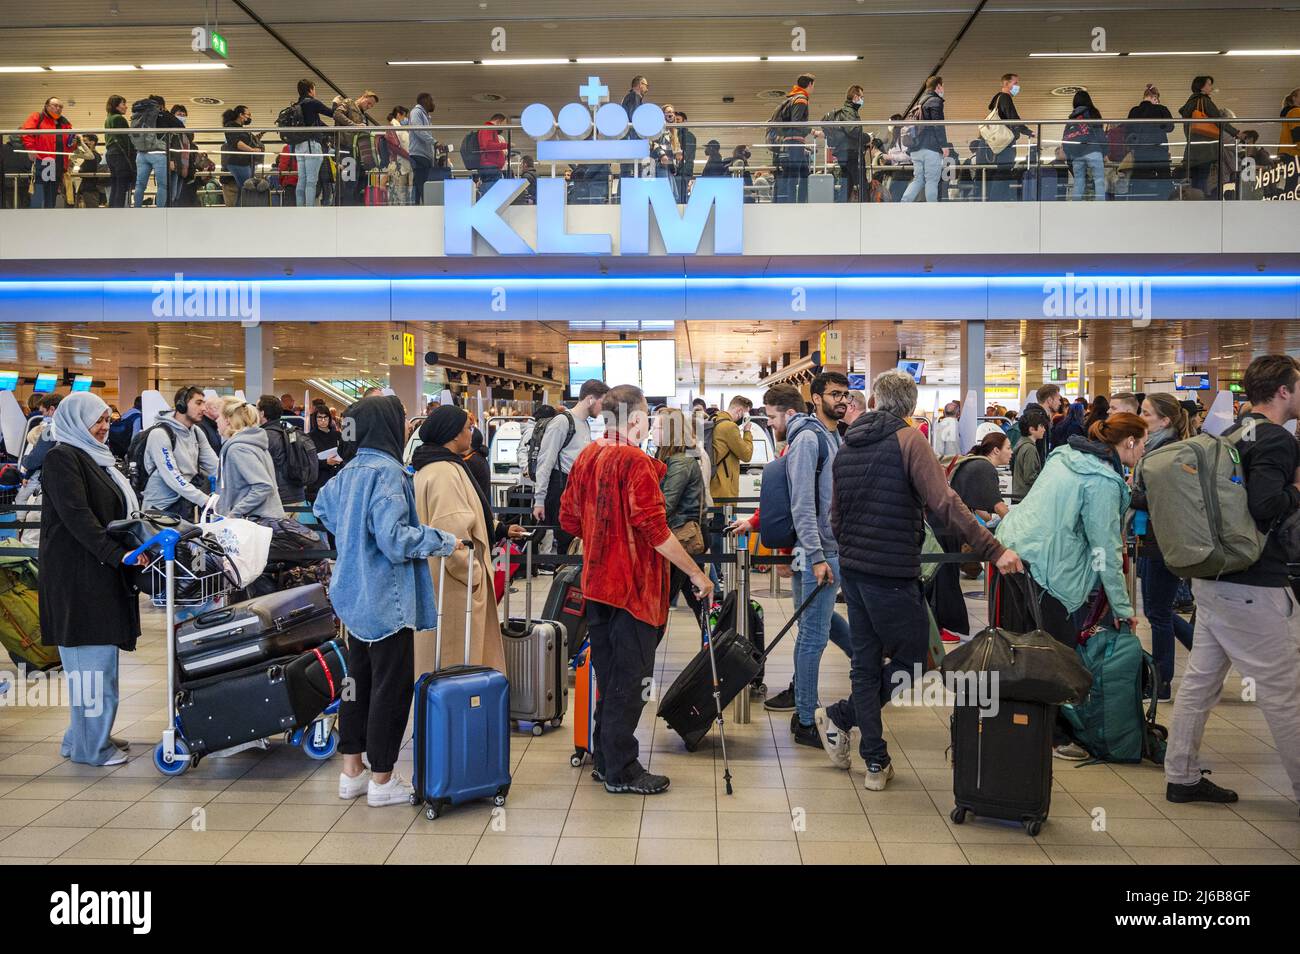 Schiphol, Netherlands. 30th Apr, 2022. 2022-04-30 06:50:04 SCHIPHOL - Schiphol Airport is very busy this weekend. The airport is facing serious staff shortages because there are hundreds of vacancies at the check-in desks, security and in the baggage basement that cannot be filled. ANP EVERT ELZINGA netherlands out - belgium out Credit: ANP/Alamy Live News Stock Photo